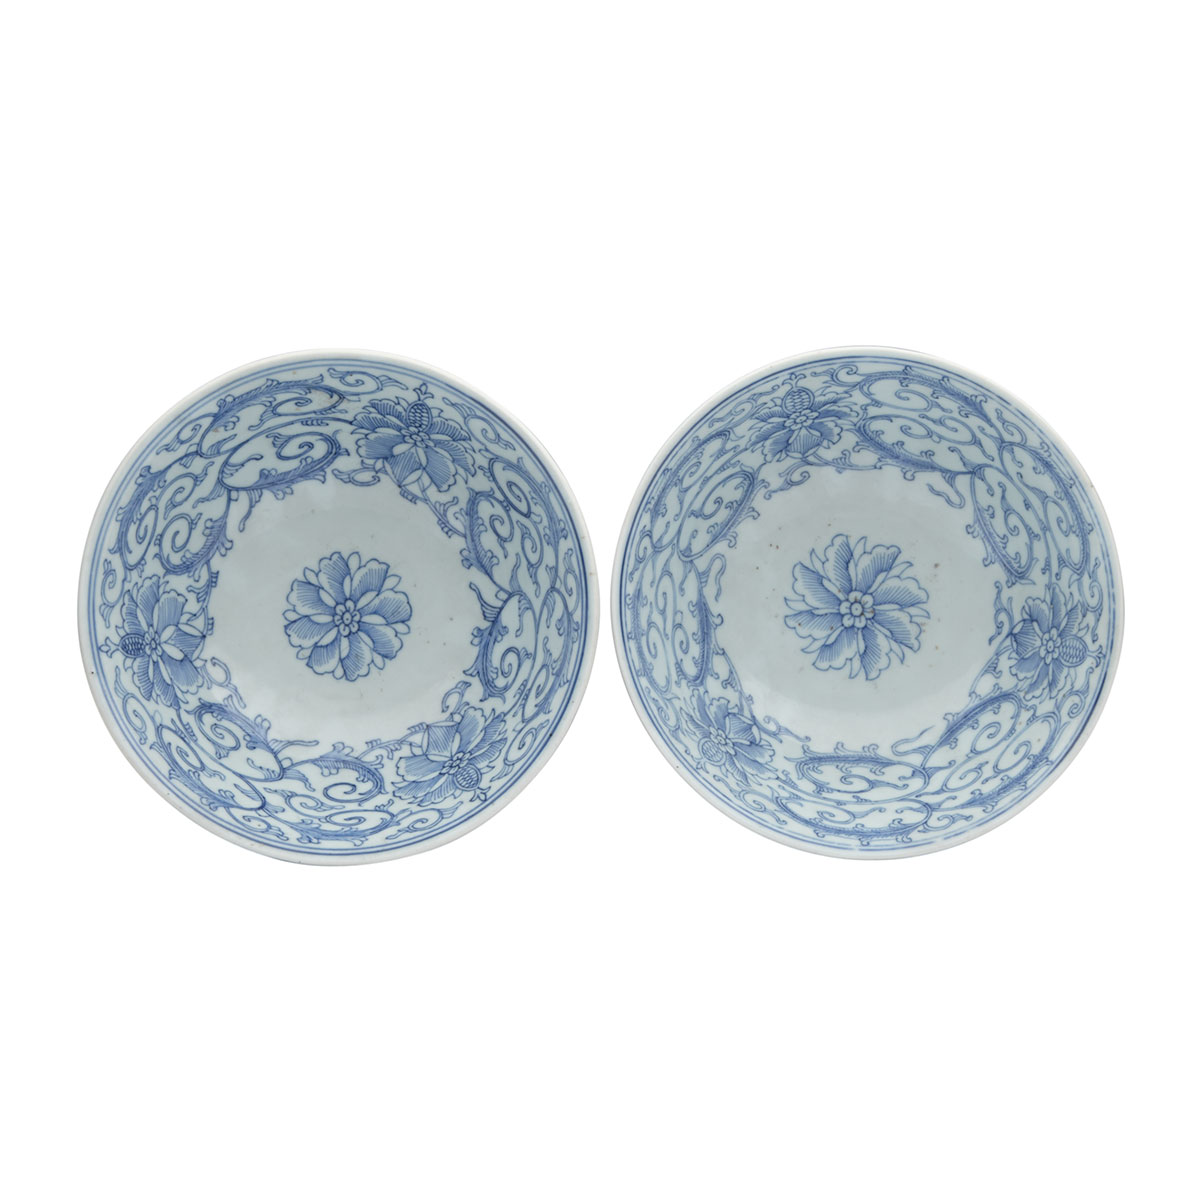 Pair of Sacrificial Blue Ground Bowls, Qianlong Mark and Period (1736-1795)